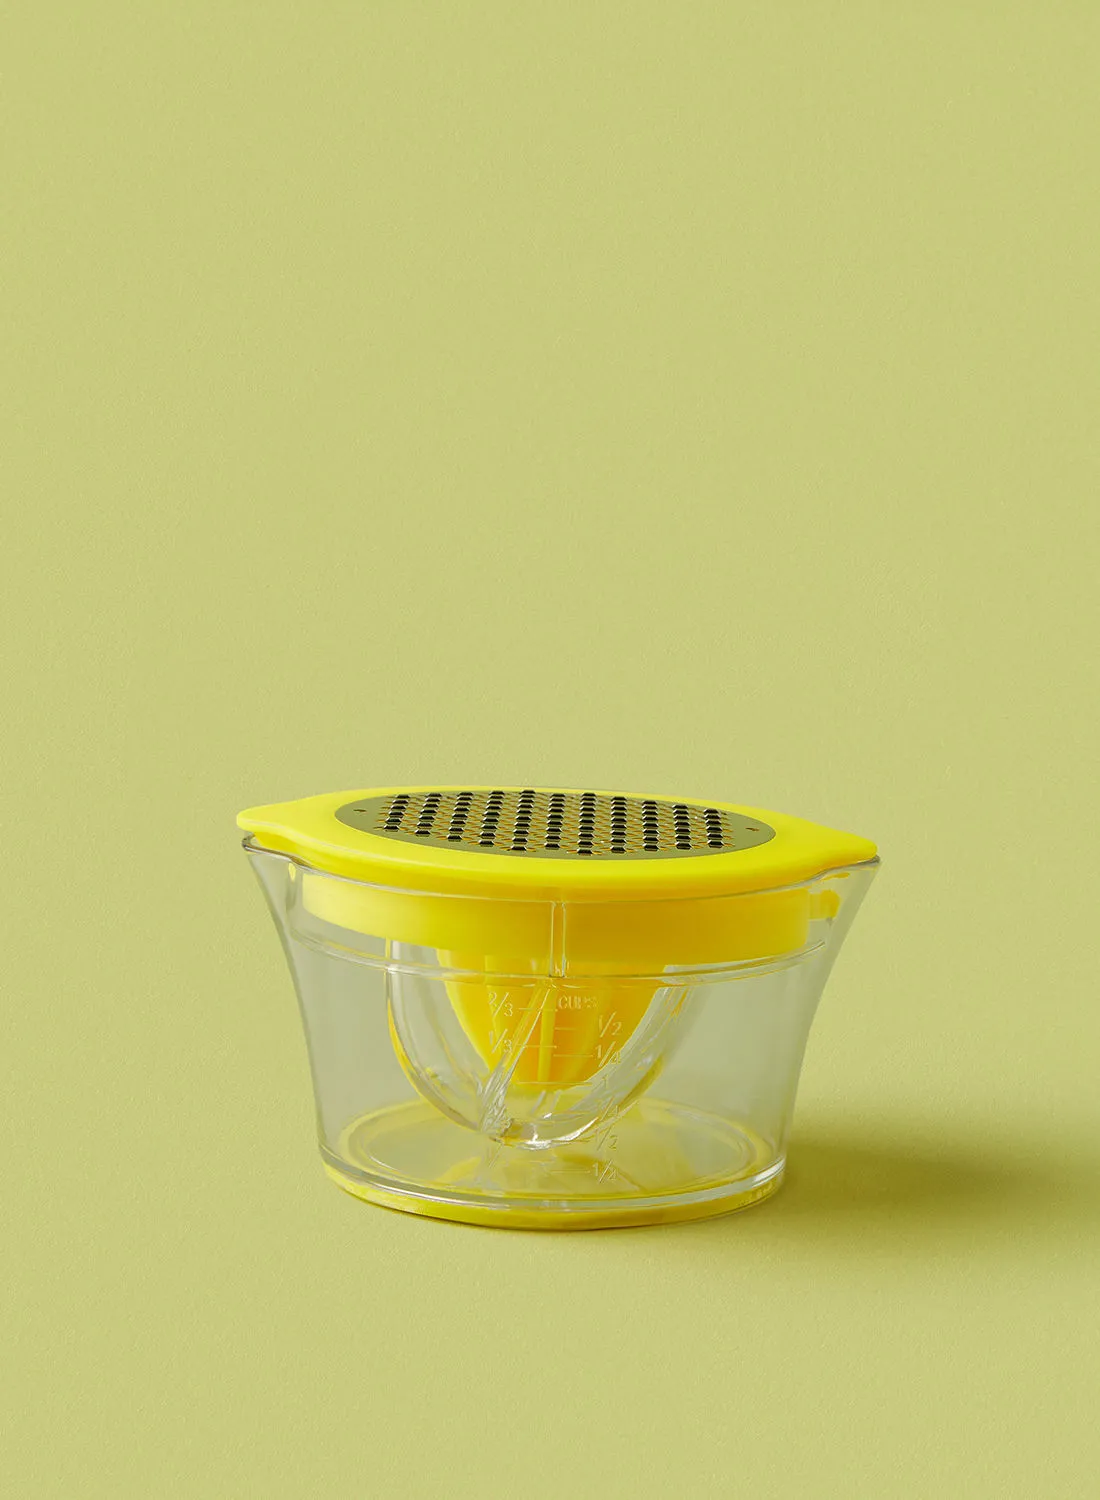 noon east Kitchen Tool - 2 In 1 - Manual Juicer And Grater - Lemon Squeezer - Kitchen Accessories - Kitchen Tool - Yellow/ White